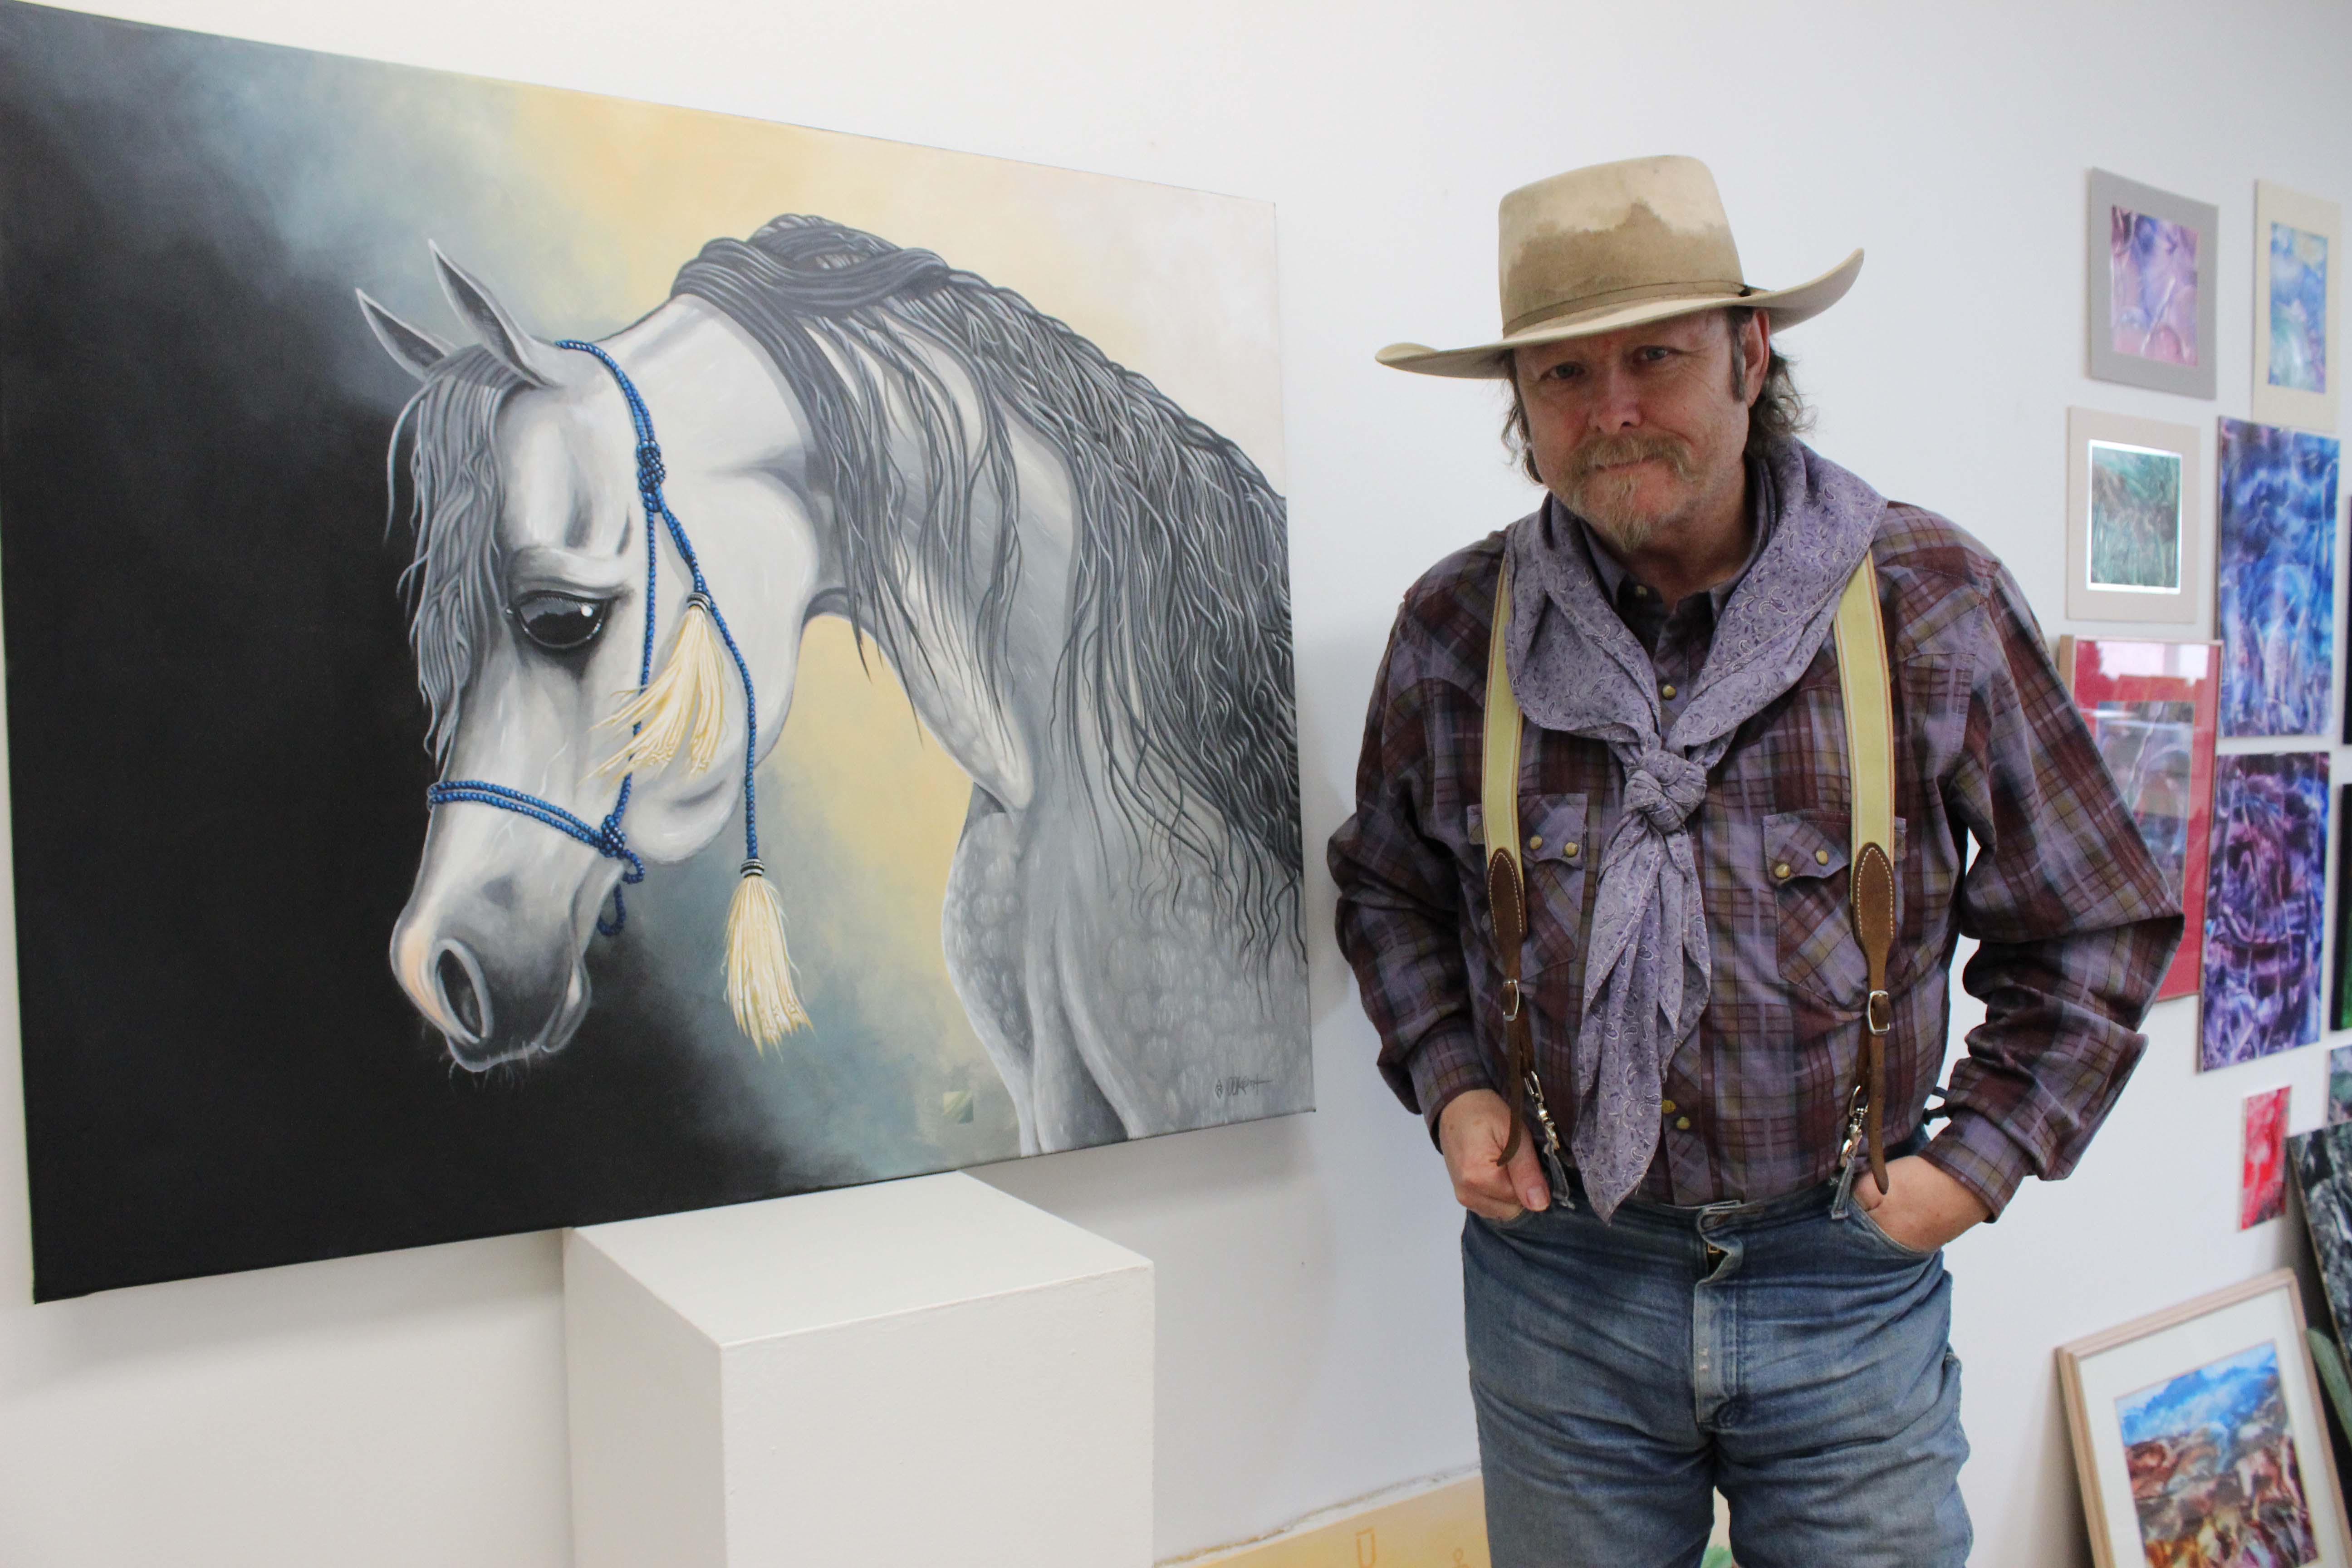 â€˜Diamond' Doug Keith shows a painting of an Arabian horse he created as a gift for his therapist.